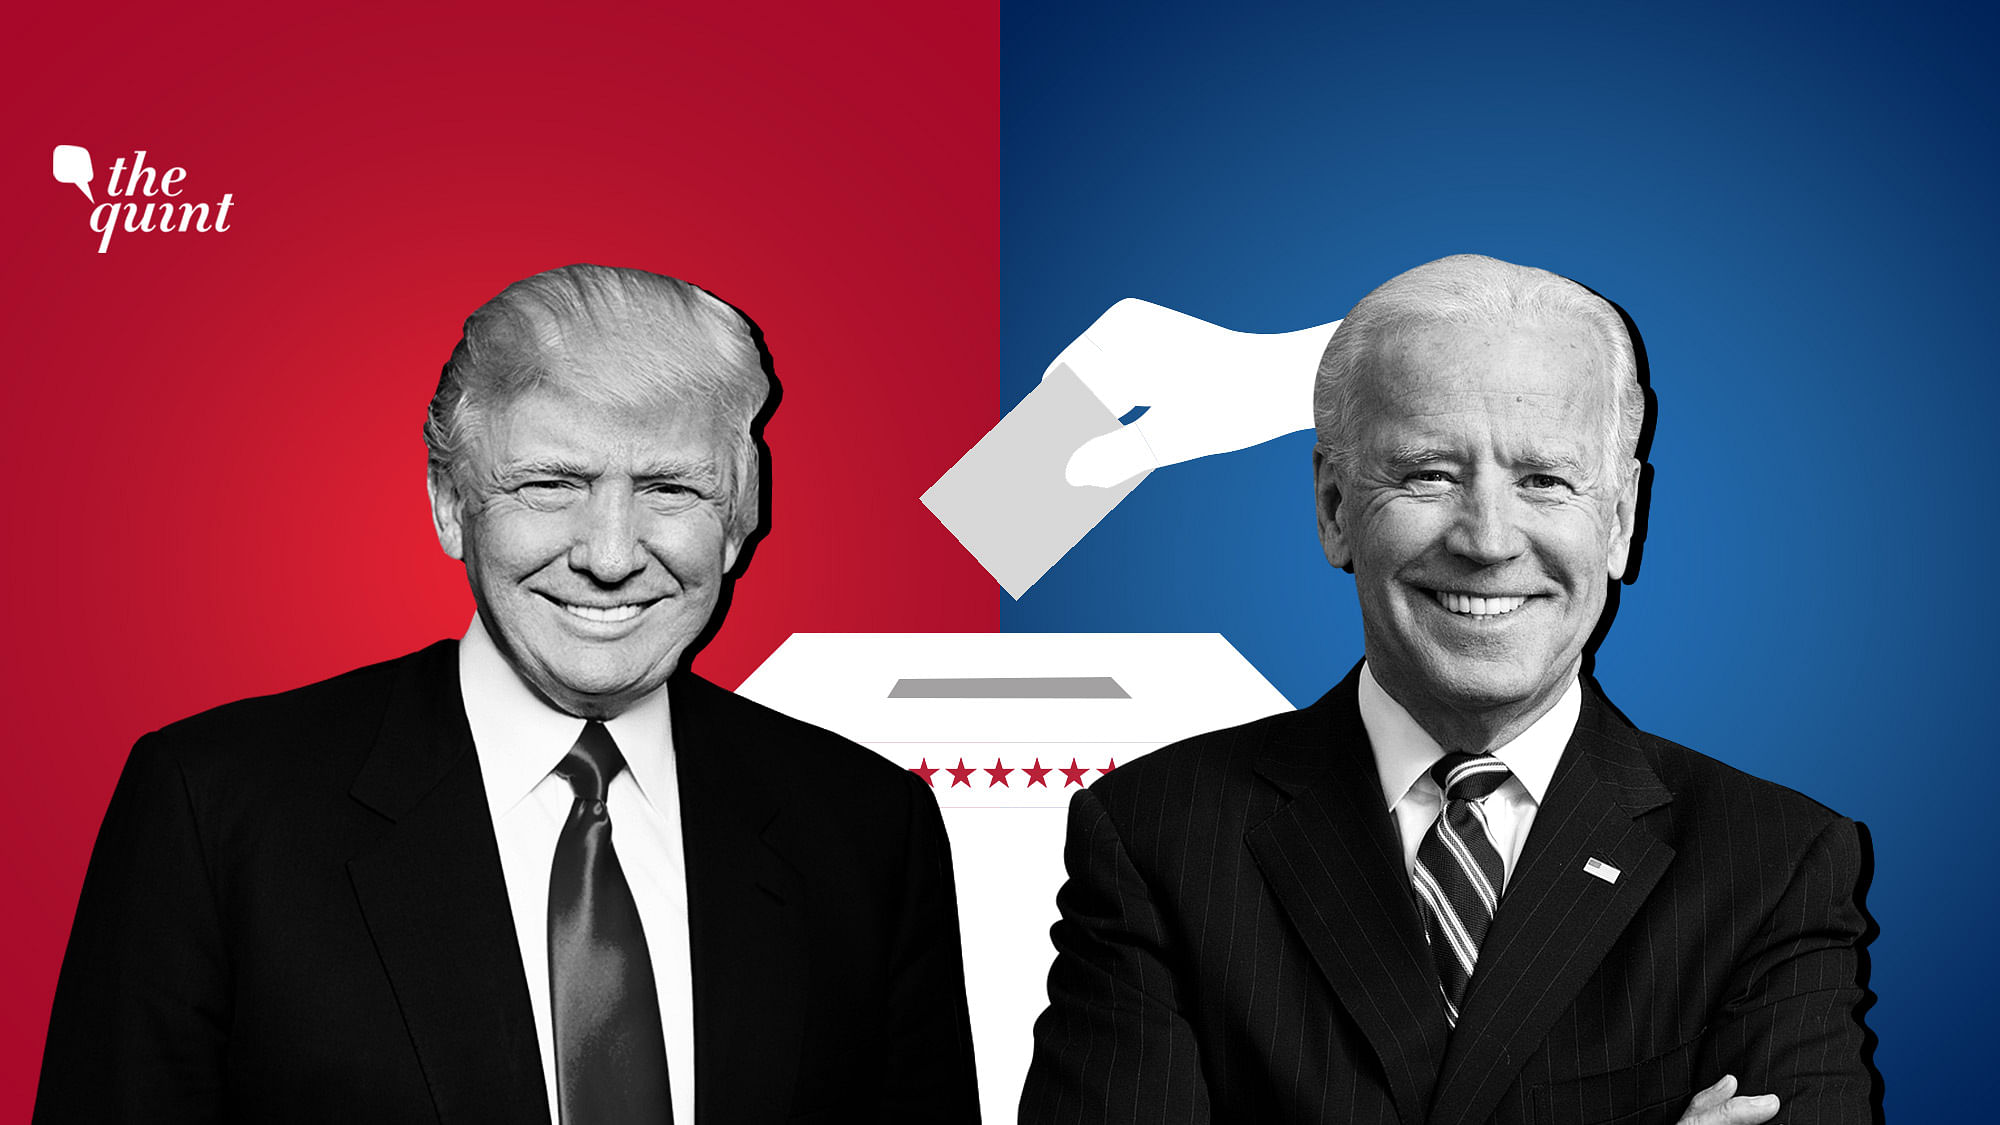 As the ballot counting continues, Biden and Trump both addressed the American electorate on Thursday.